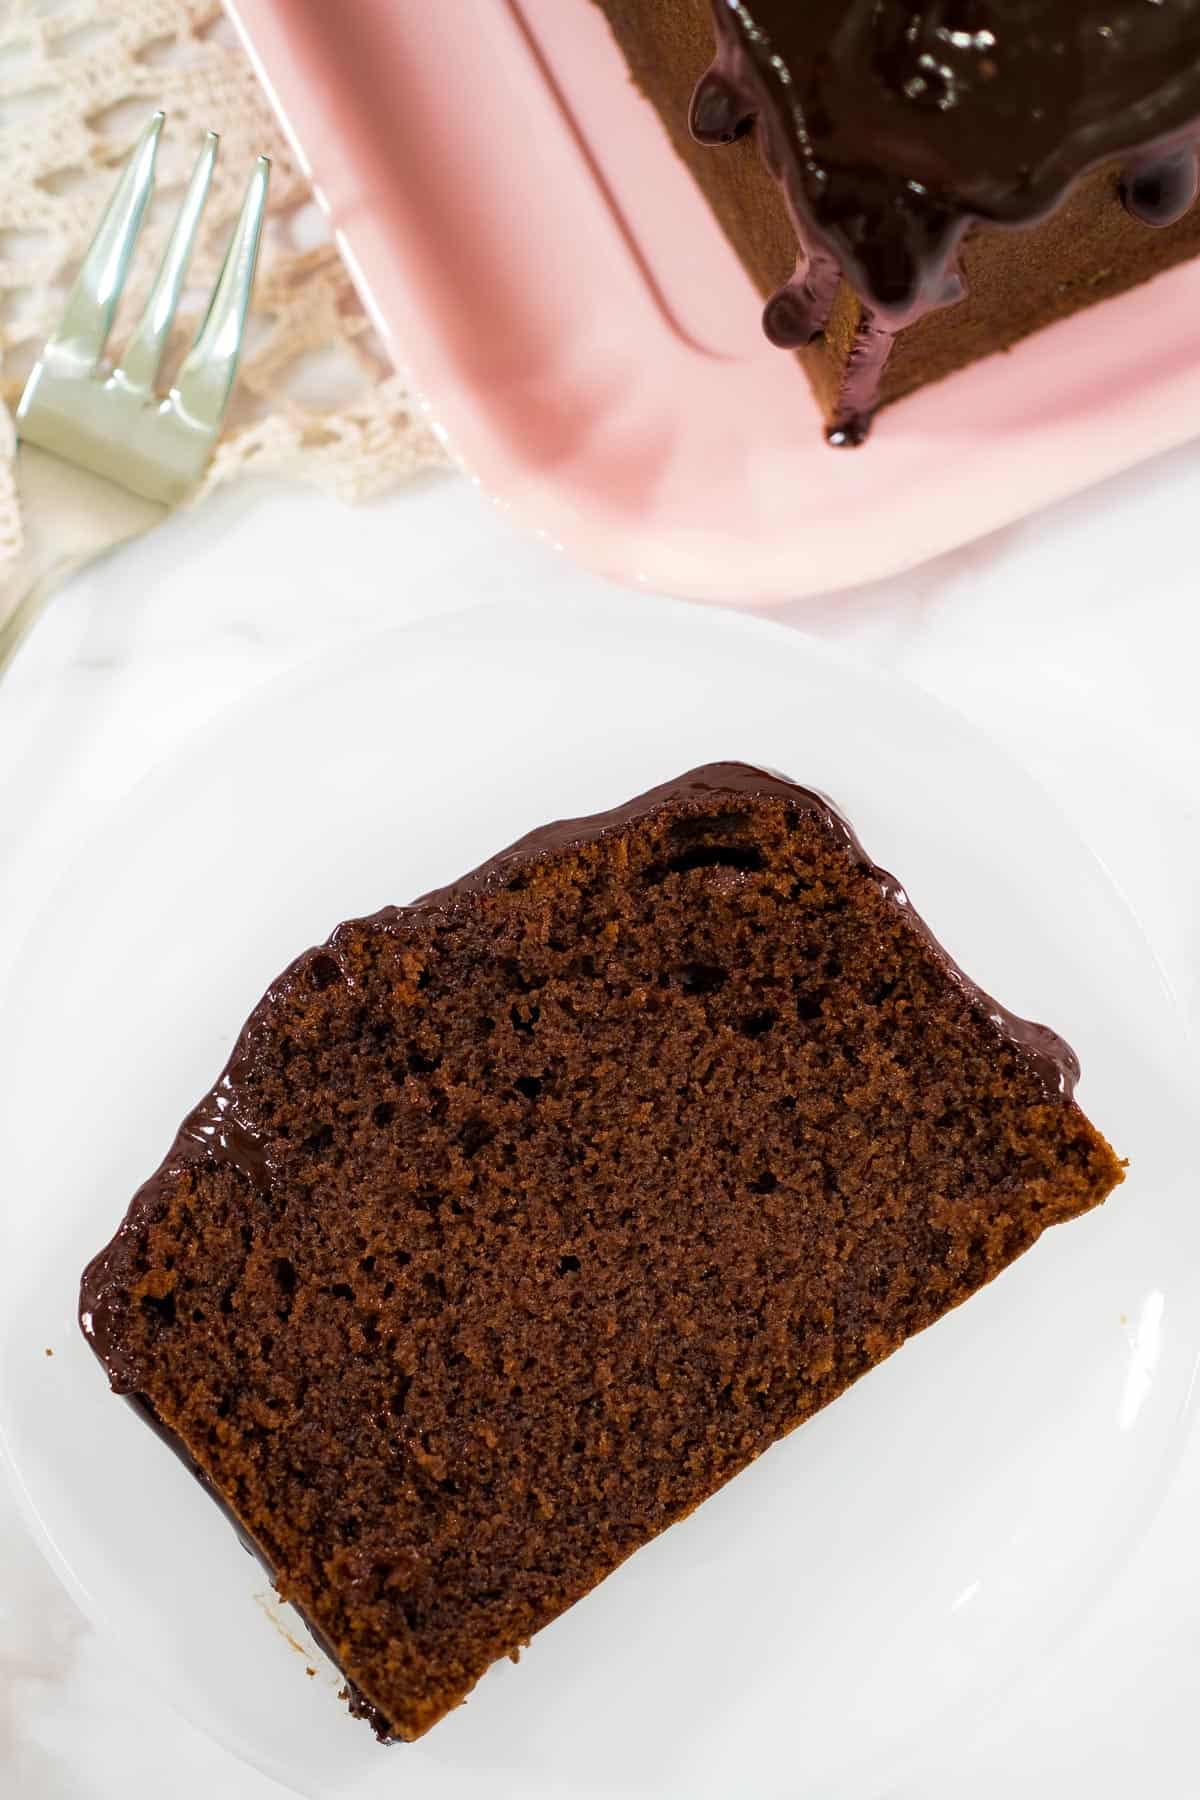 A slice of chocolate cake on a white plate